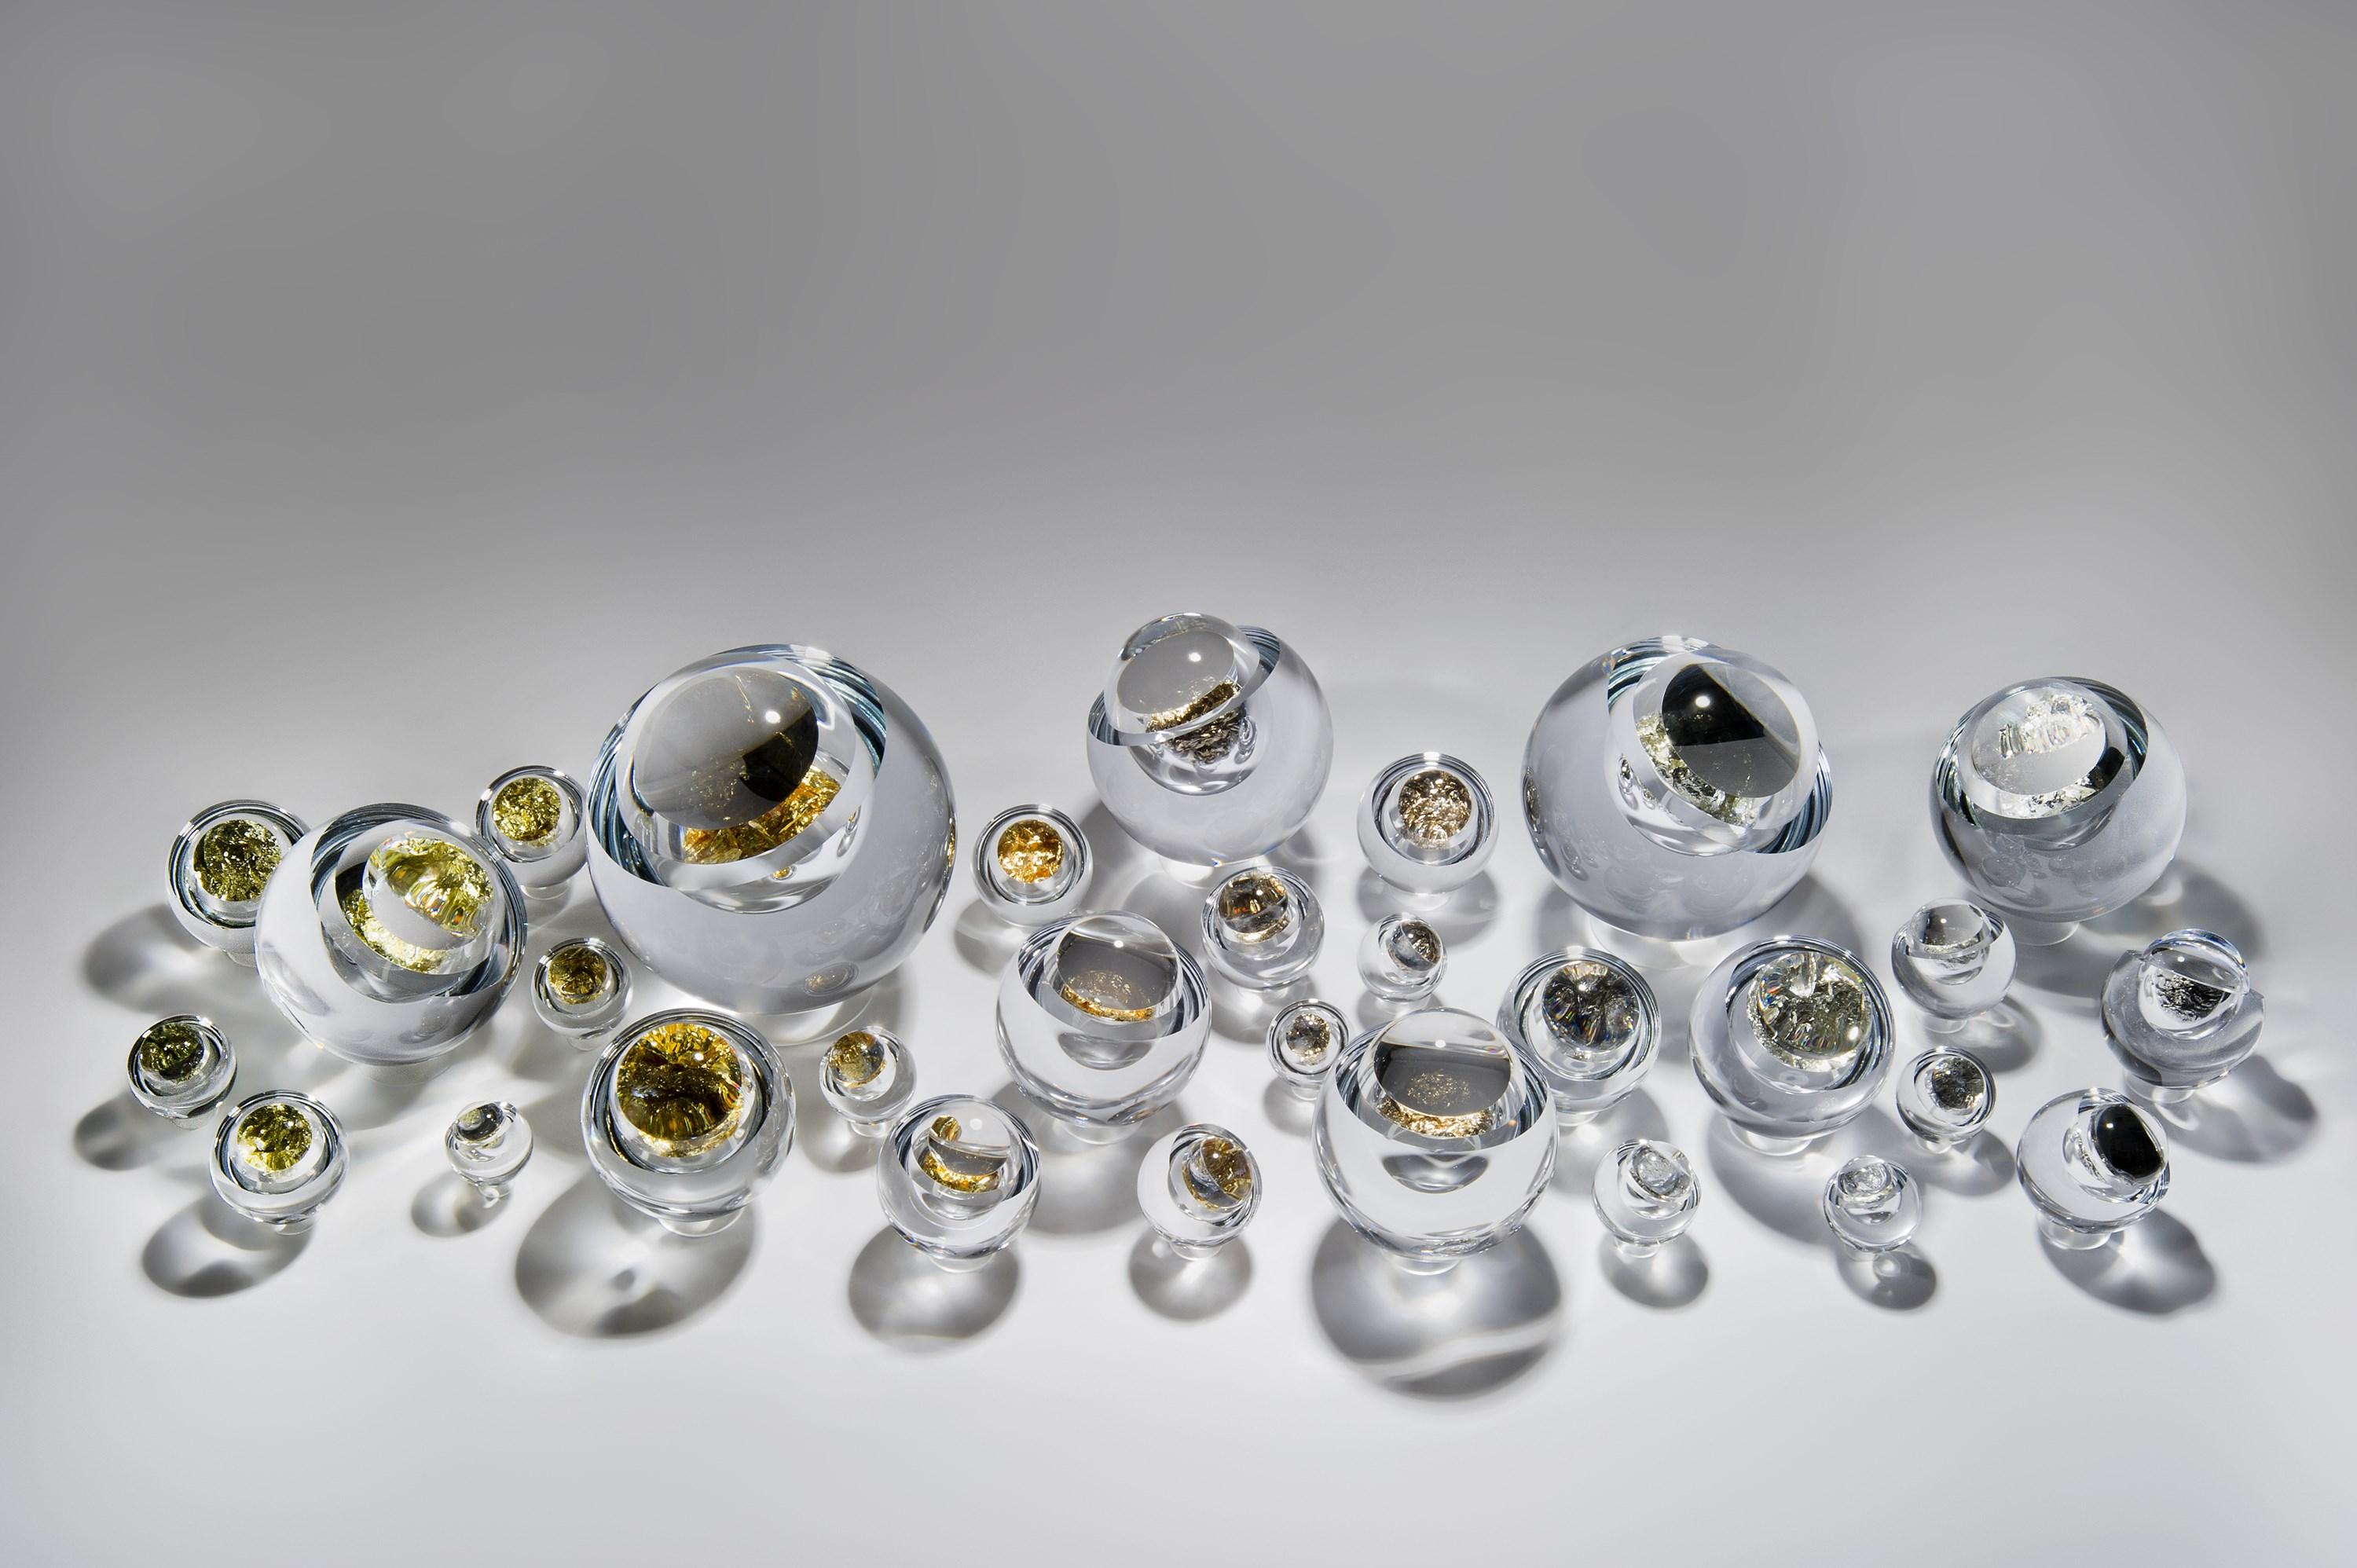 Contemporary Auri No 30 with Platinum, an Optical Orb Glass Sculpture by Anthony Scala For Sale